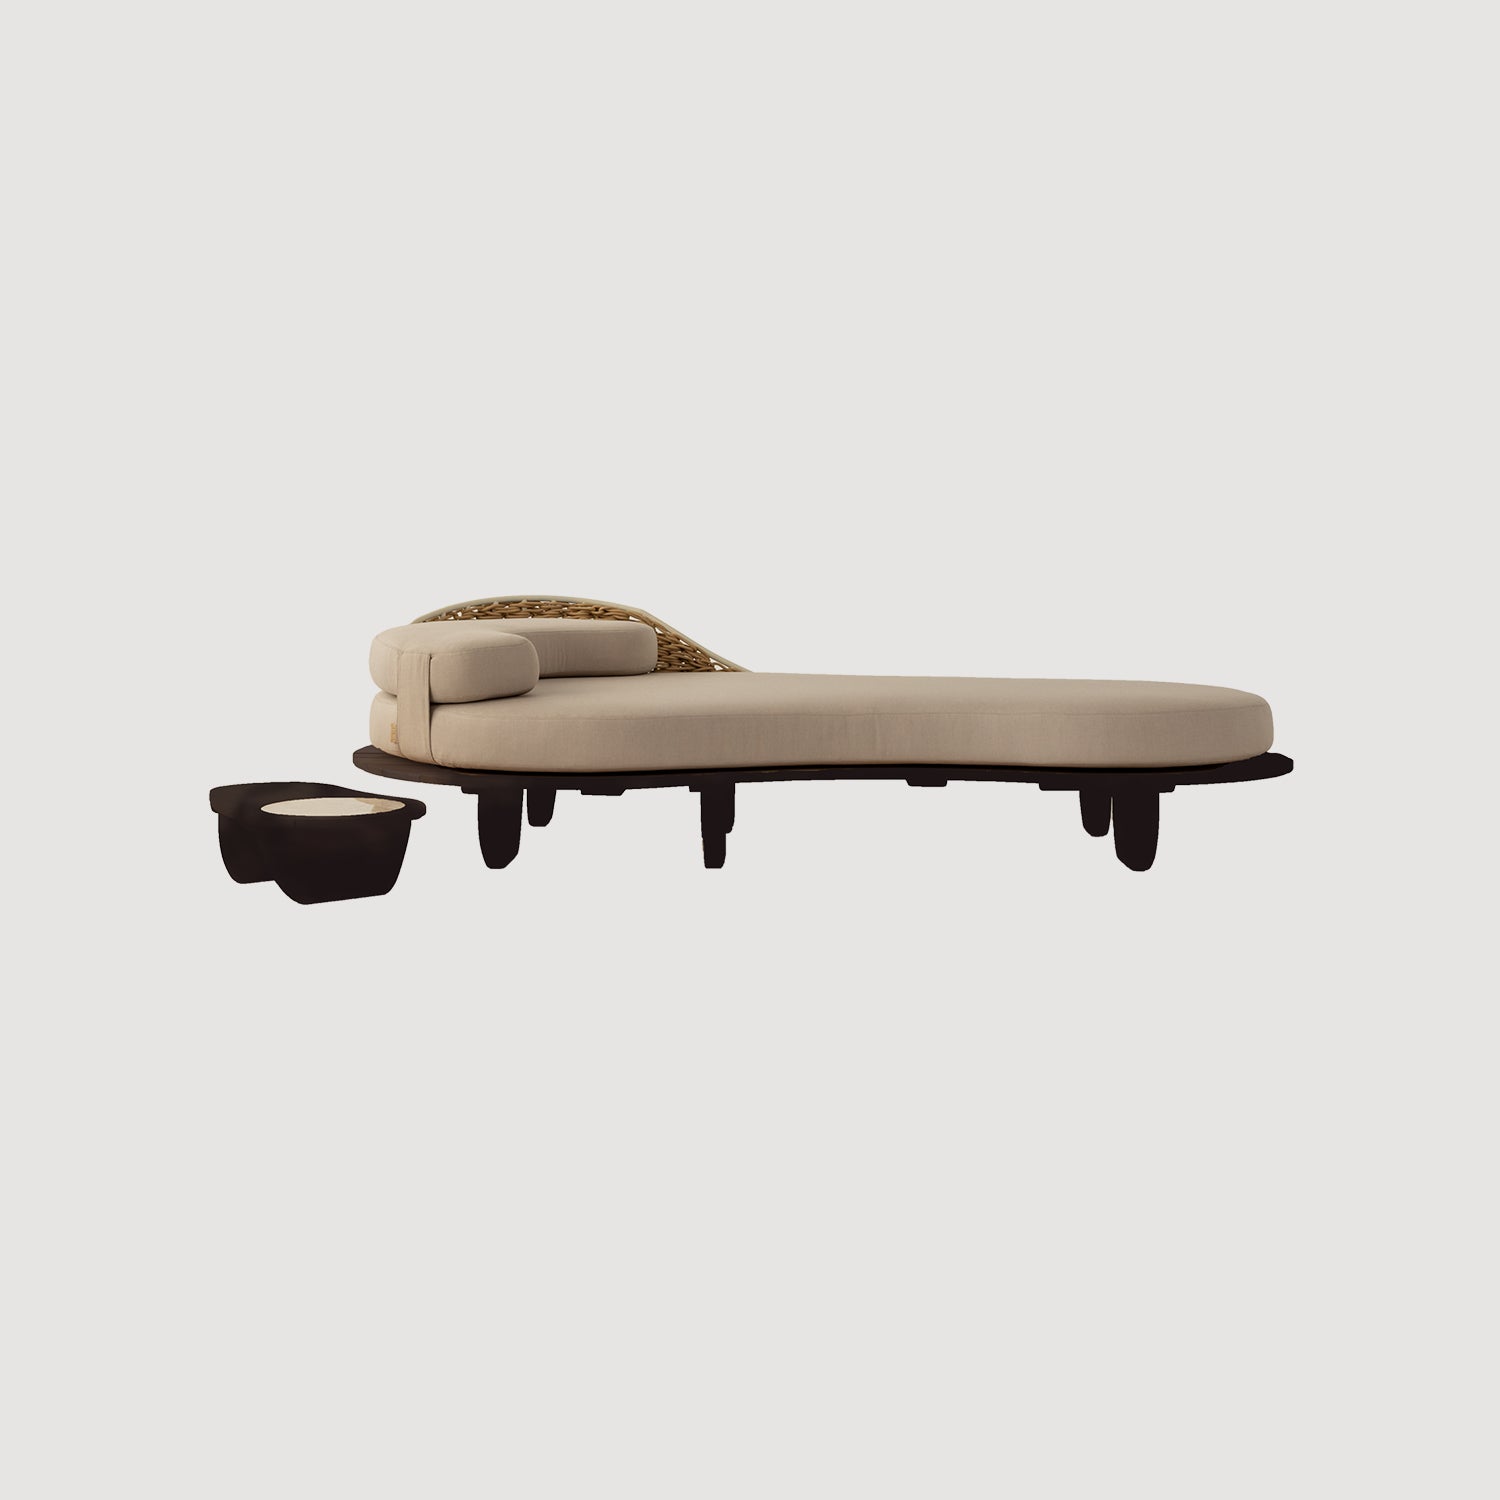 The Sayari Indoor / Outdoor Daybed Chaise and Table Collection by Studio Lloyd For Sale